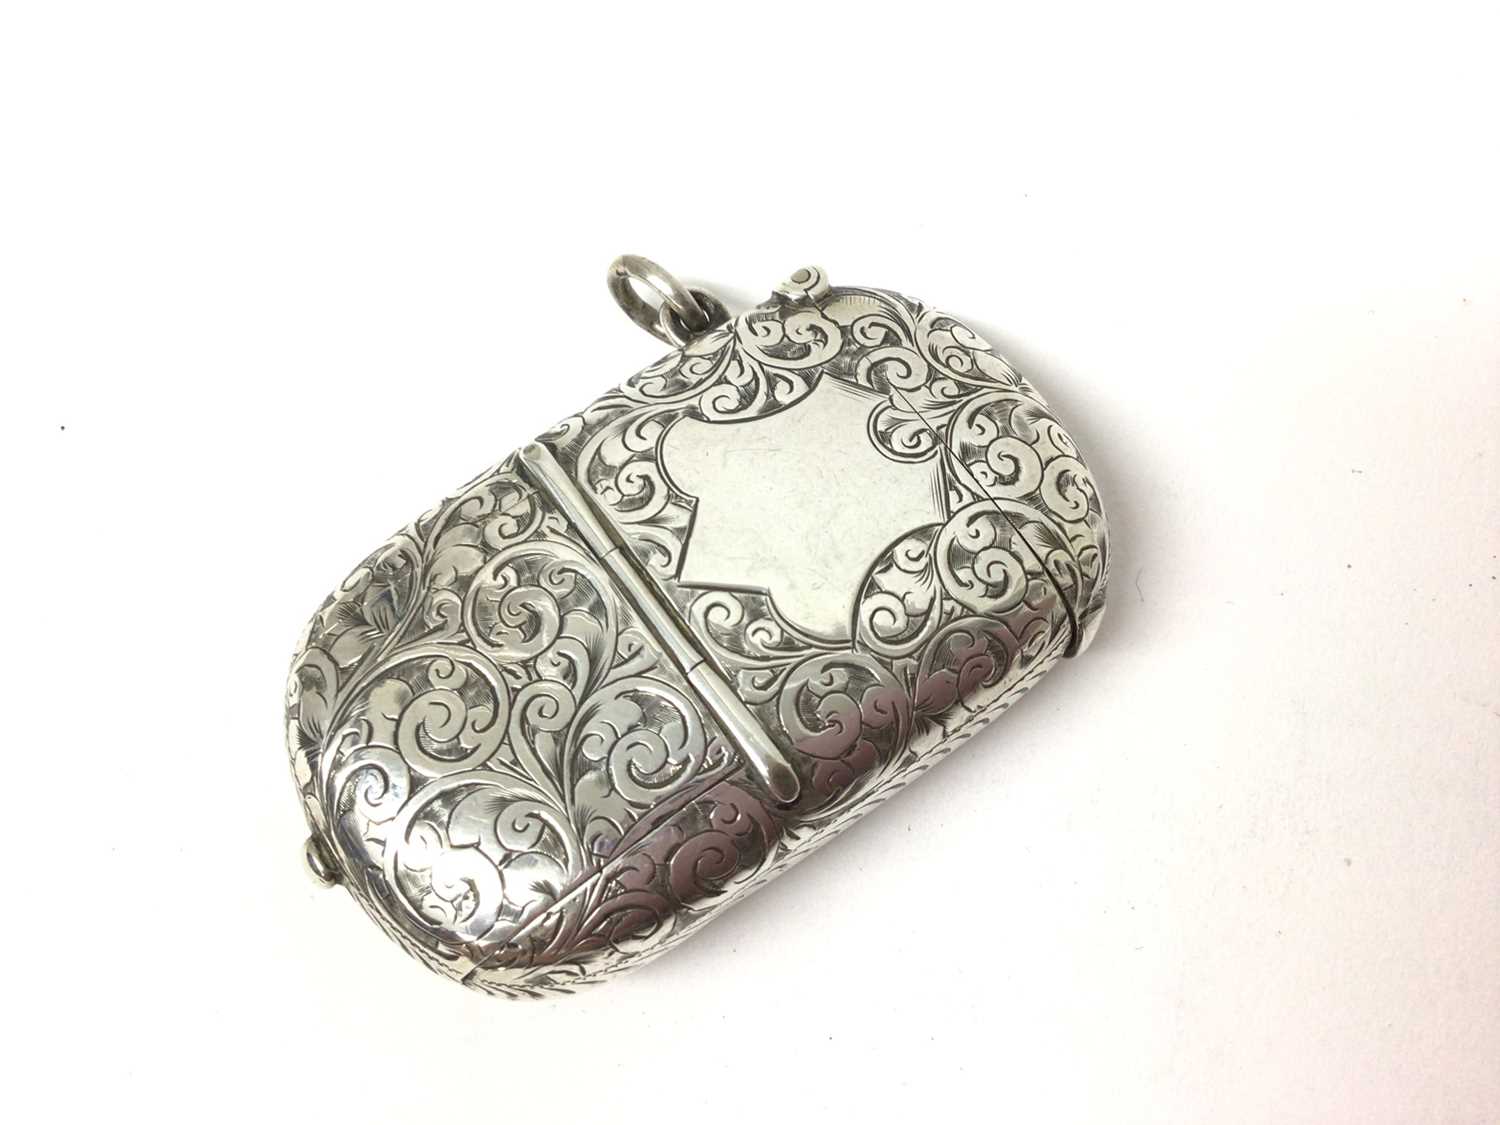 Lot 174 - Large late Victorian silver combination vesta and sovereign case with two fitted toothpicks, floral engraved decoration (Chester 1894) 6.2 x 4cm